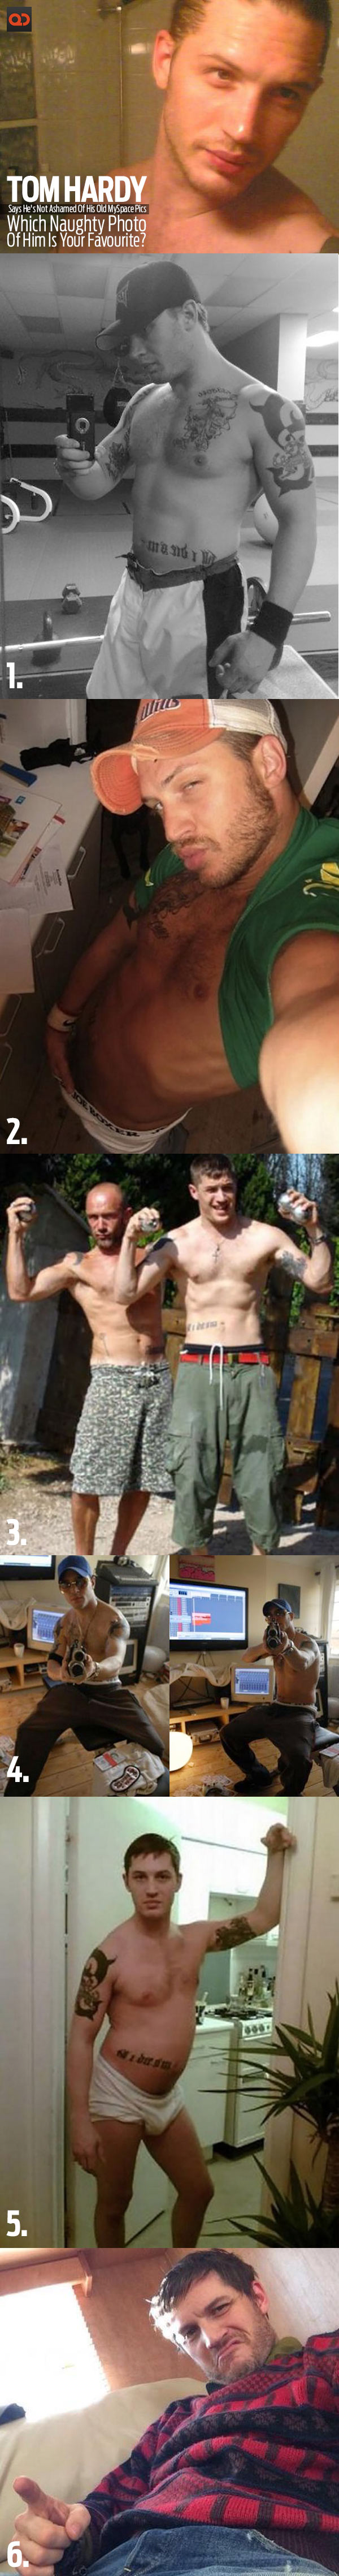 Tom Hardy Says He's Not Ashamed Of His Old MySpace Pics - Which Naughty Photo Of Him Is Your Favourite?